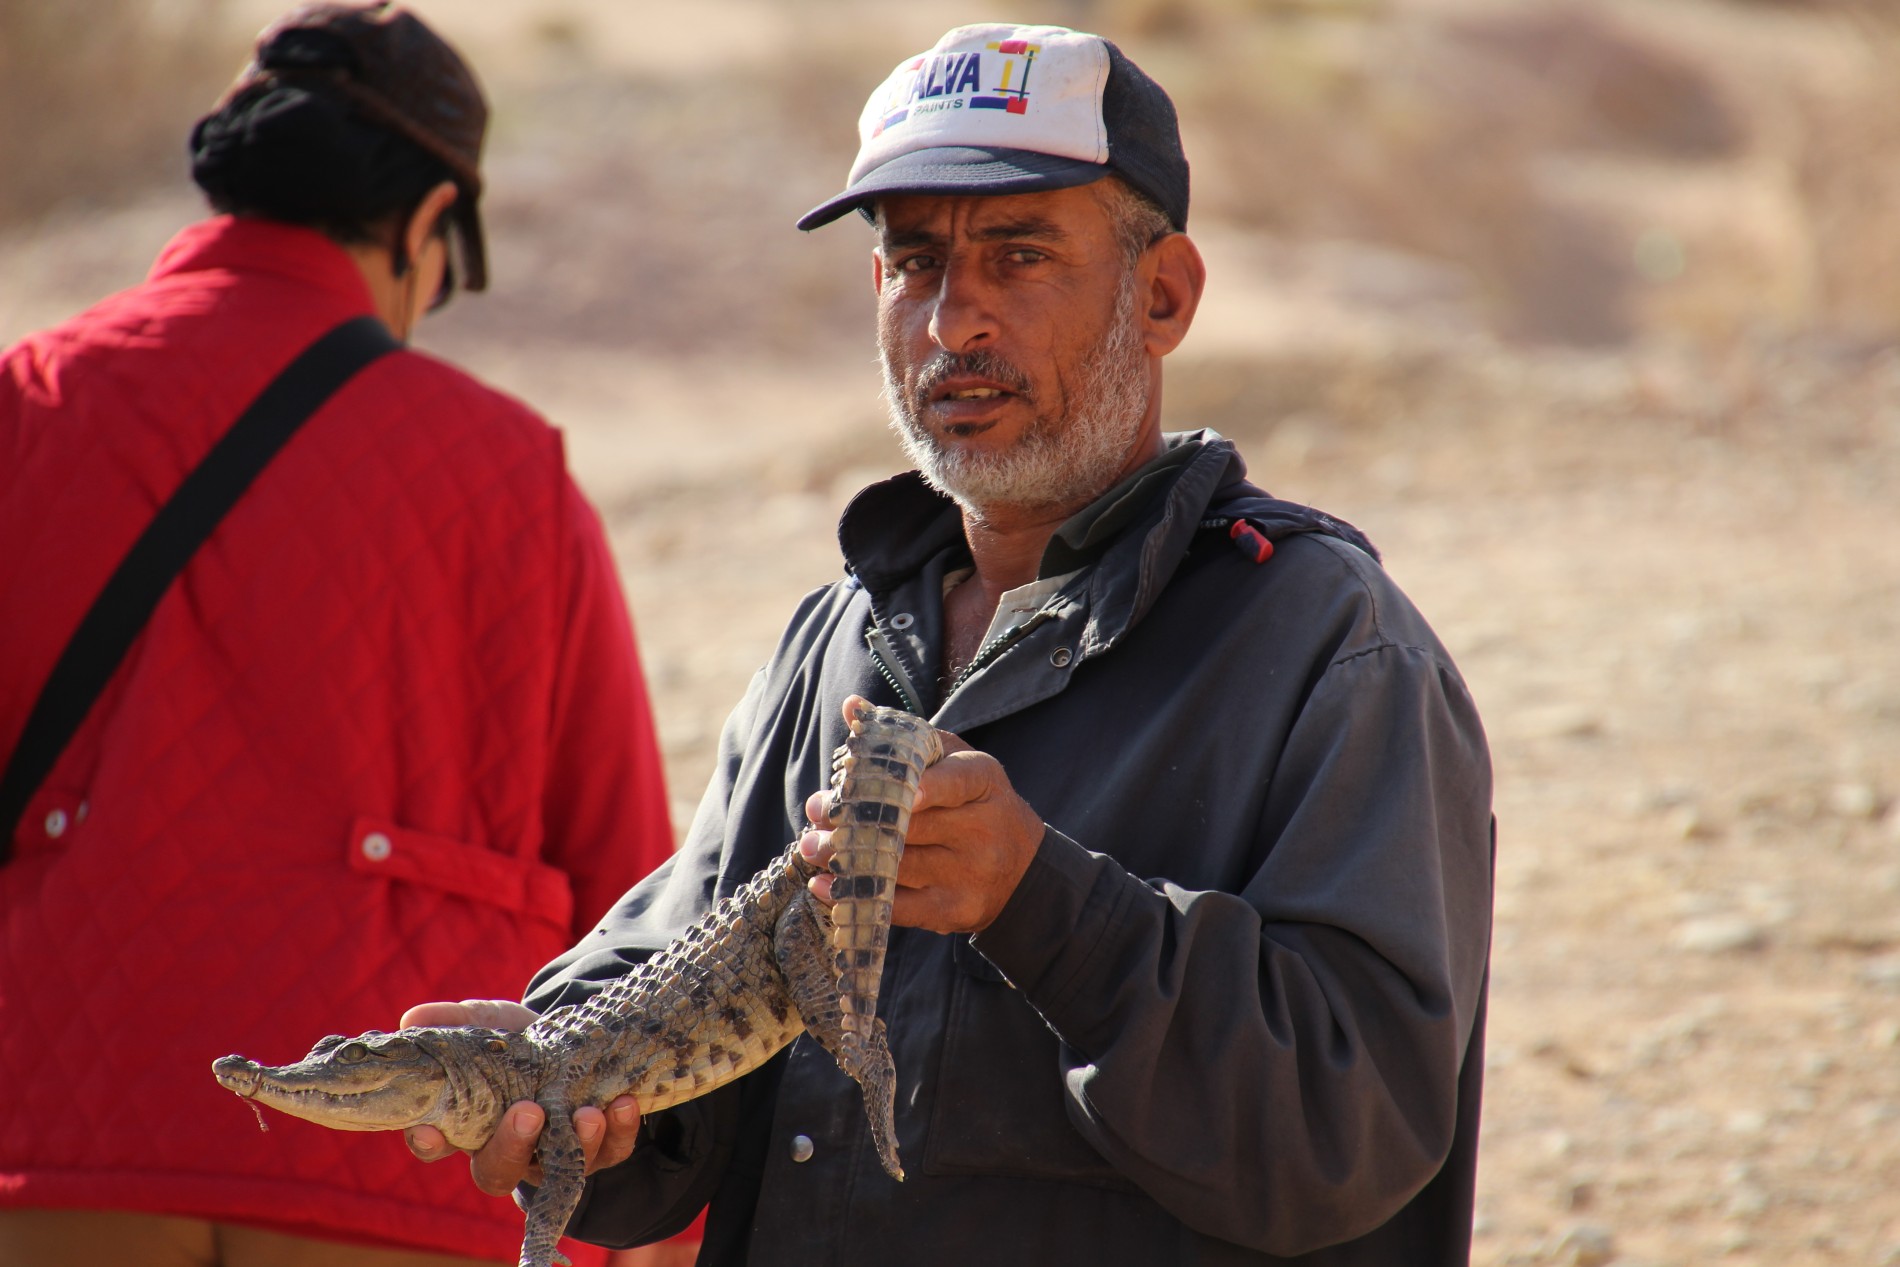 An Egyptian man tempts tourists with a crocodile near the Temple of Amada in Nubia, Egypt.